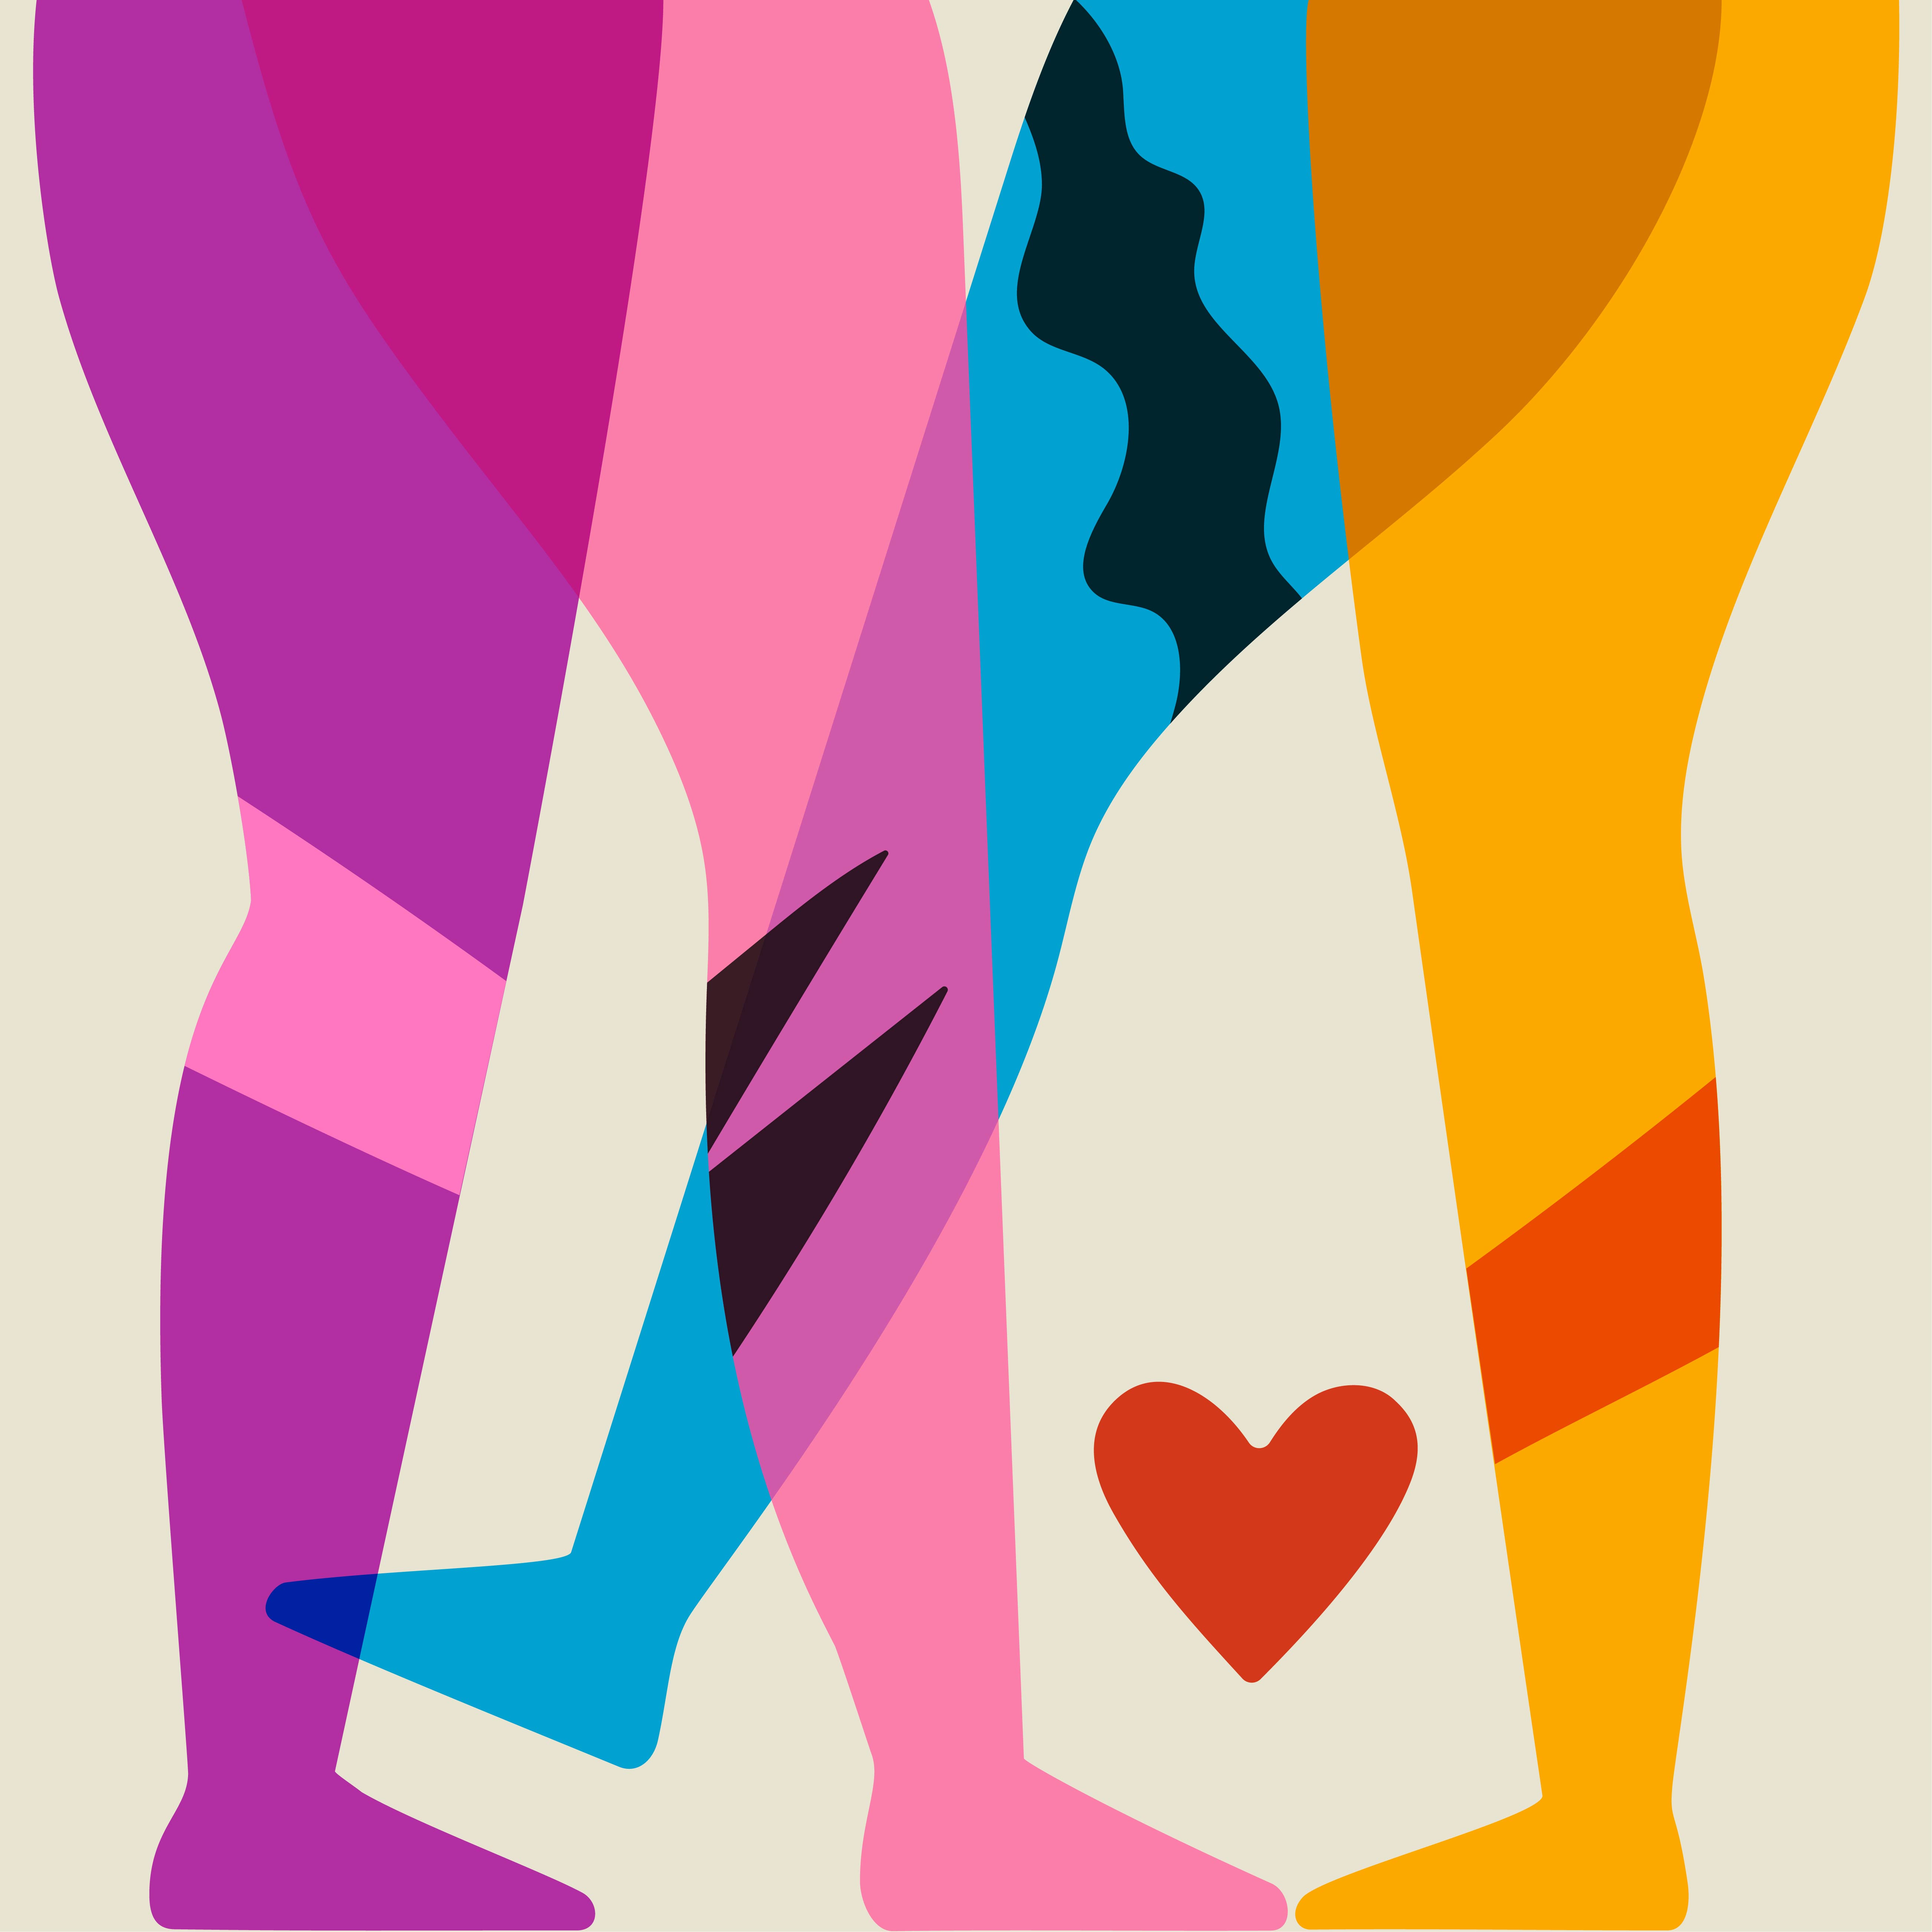 An abstract illustration of two pairs of legs with geometric designs on them walking toward each other. A small red heart is between two of the feet.